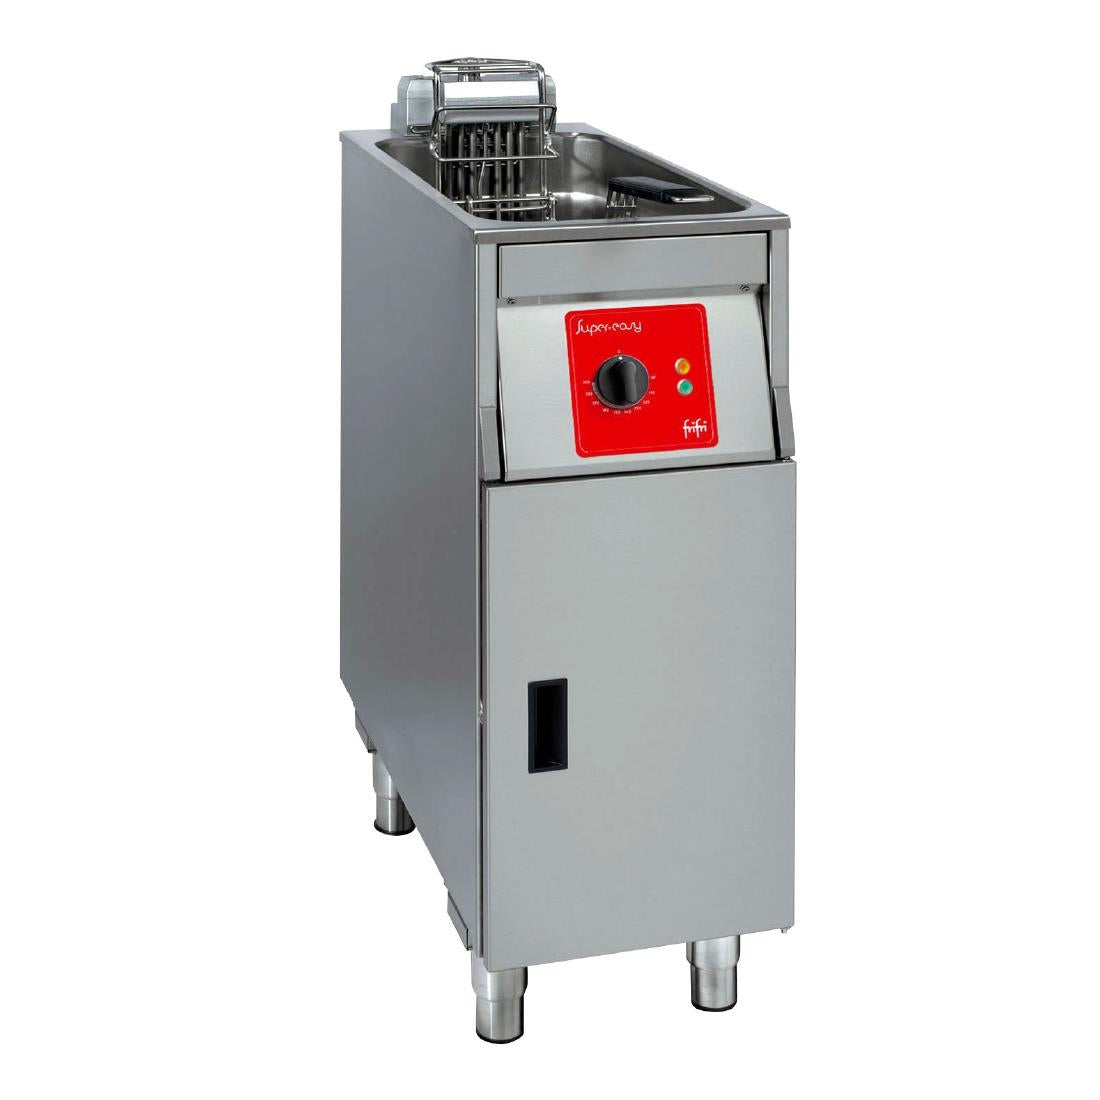 HS051-3PH FriFri Super Easy 311 Electric Free-standing Fryer Single Tank Single Basket with Filtration 11.4kW Three Phase